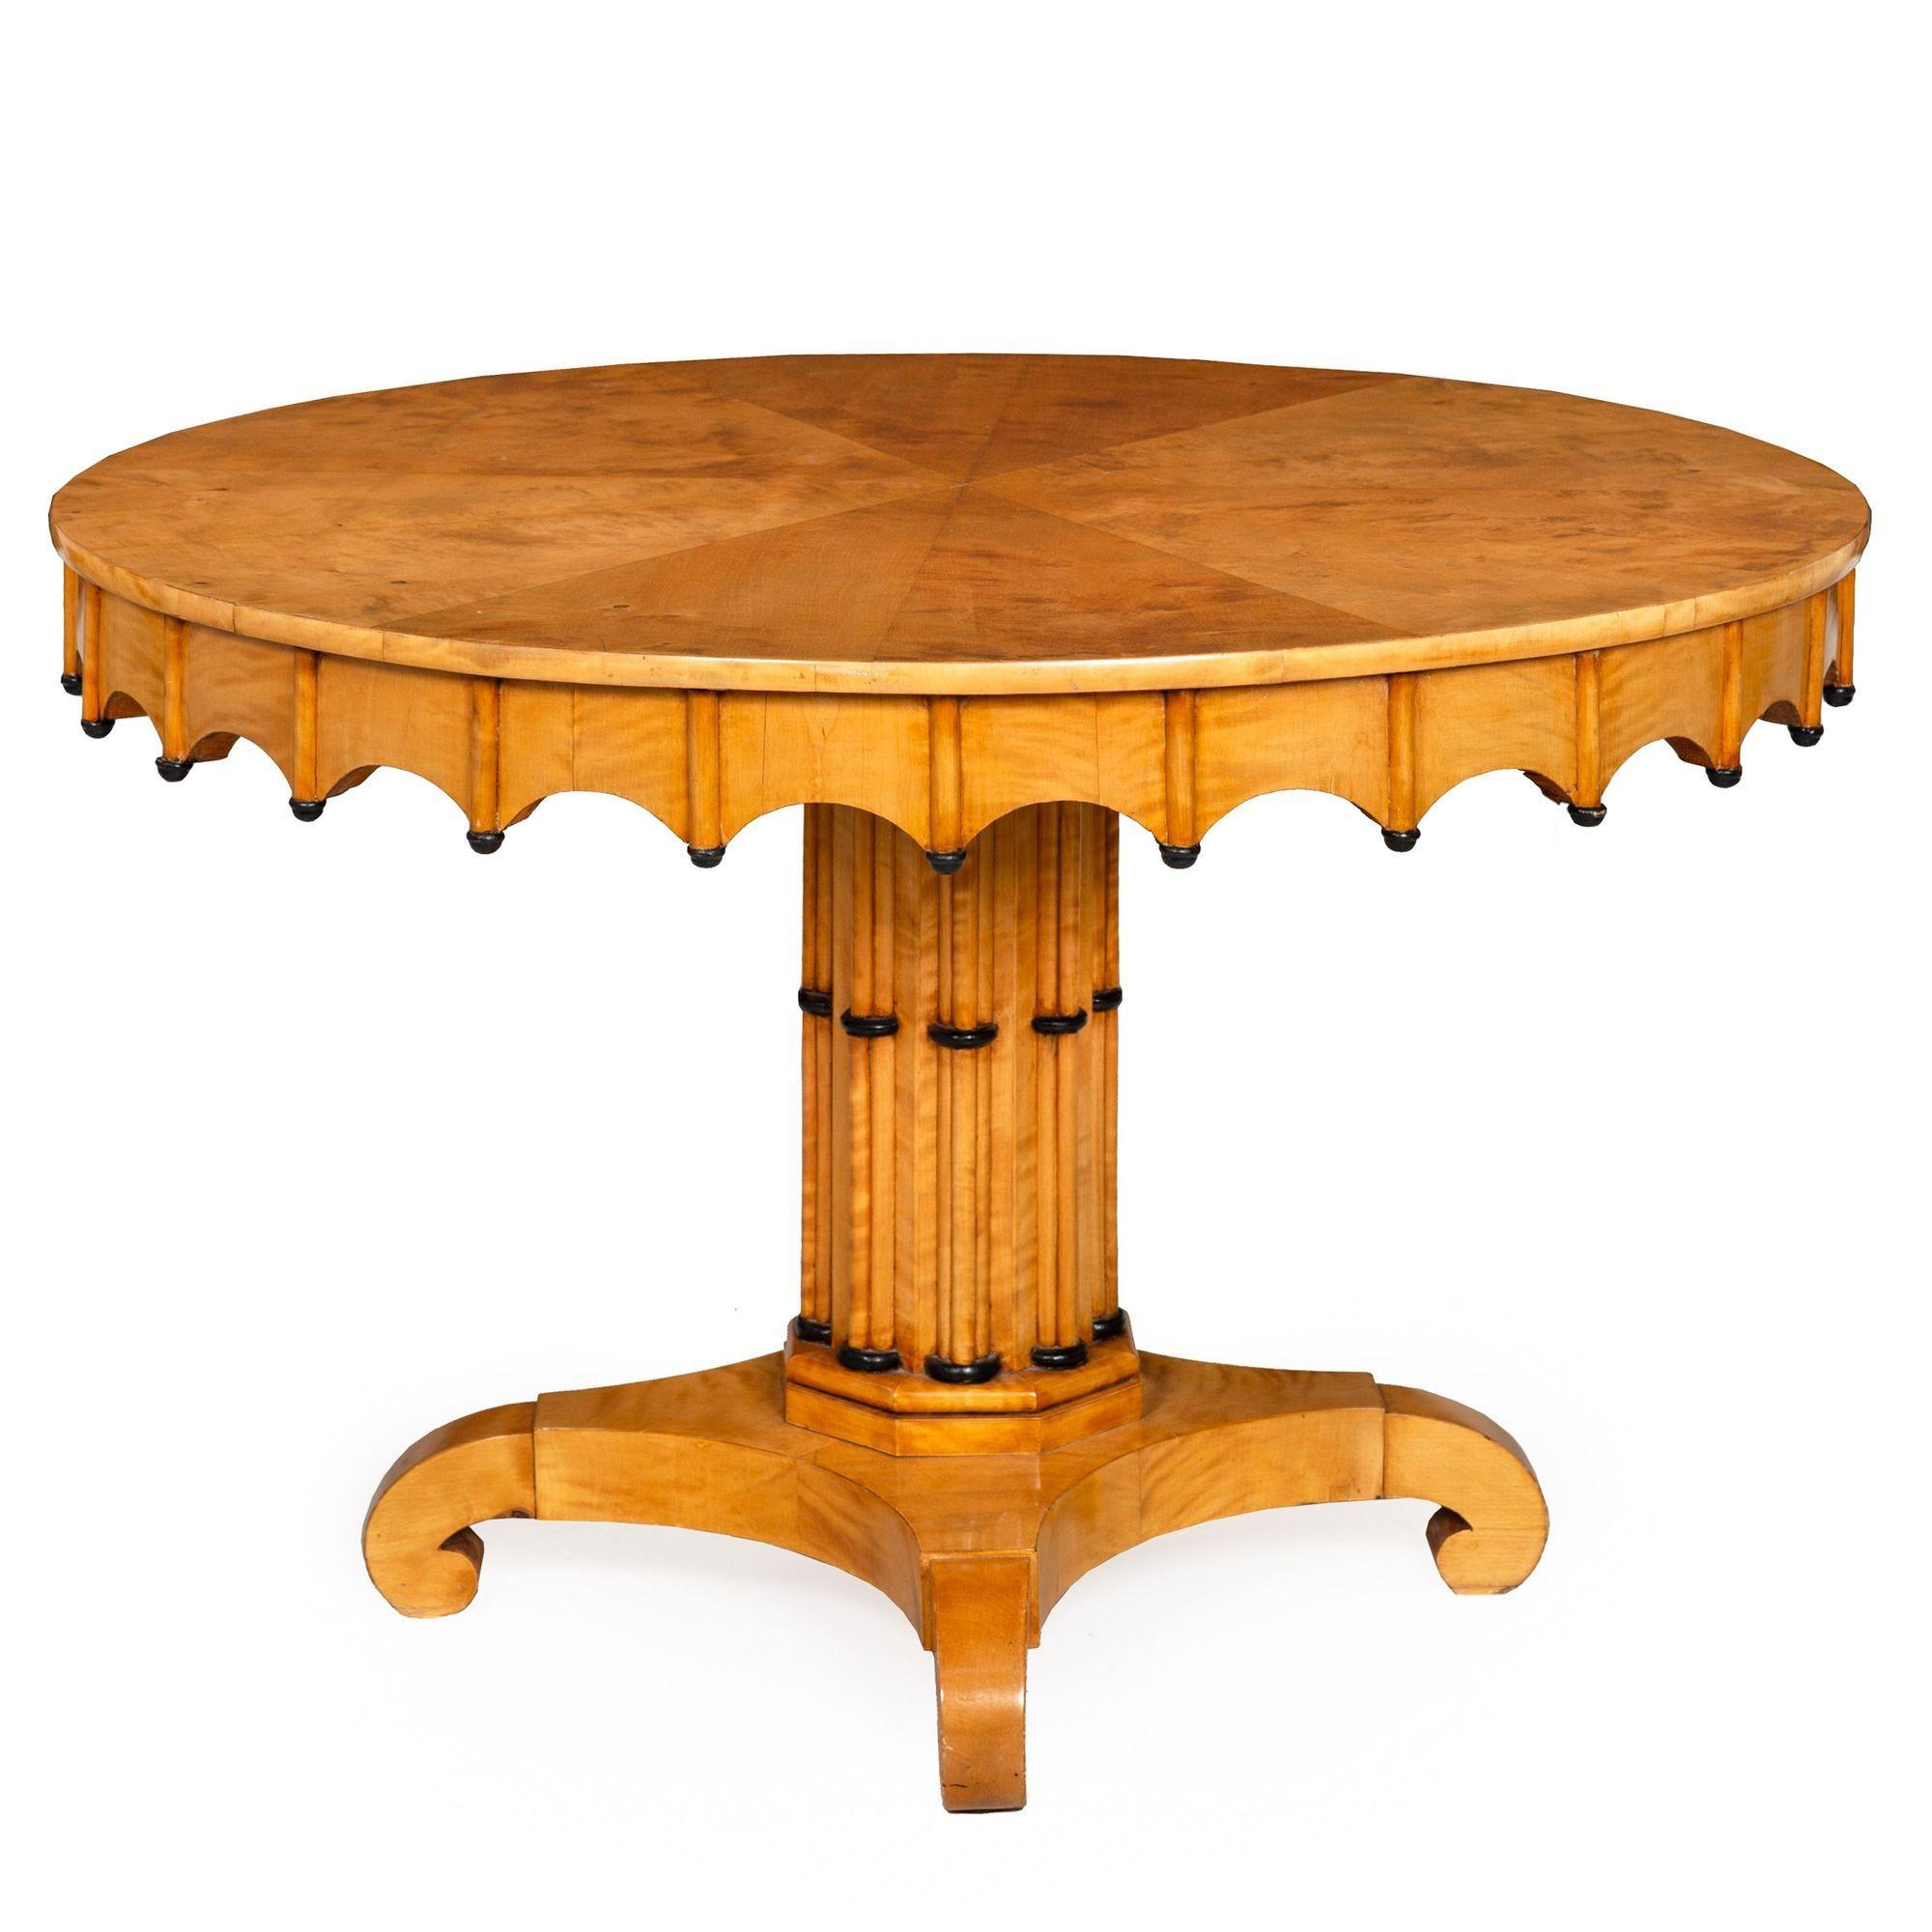 BIEDERMEIER CIRCULAR BIRCHWOOD AND PARCEL-EBONIZED CENTER TABLE
Northern Europe circa 1830
Item # 306DPQ14A 

This Biedermeier period center table features a very sleek and rather whimsical design, the simple circular top set with twelve rays of